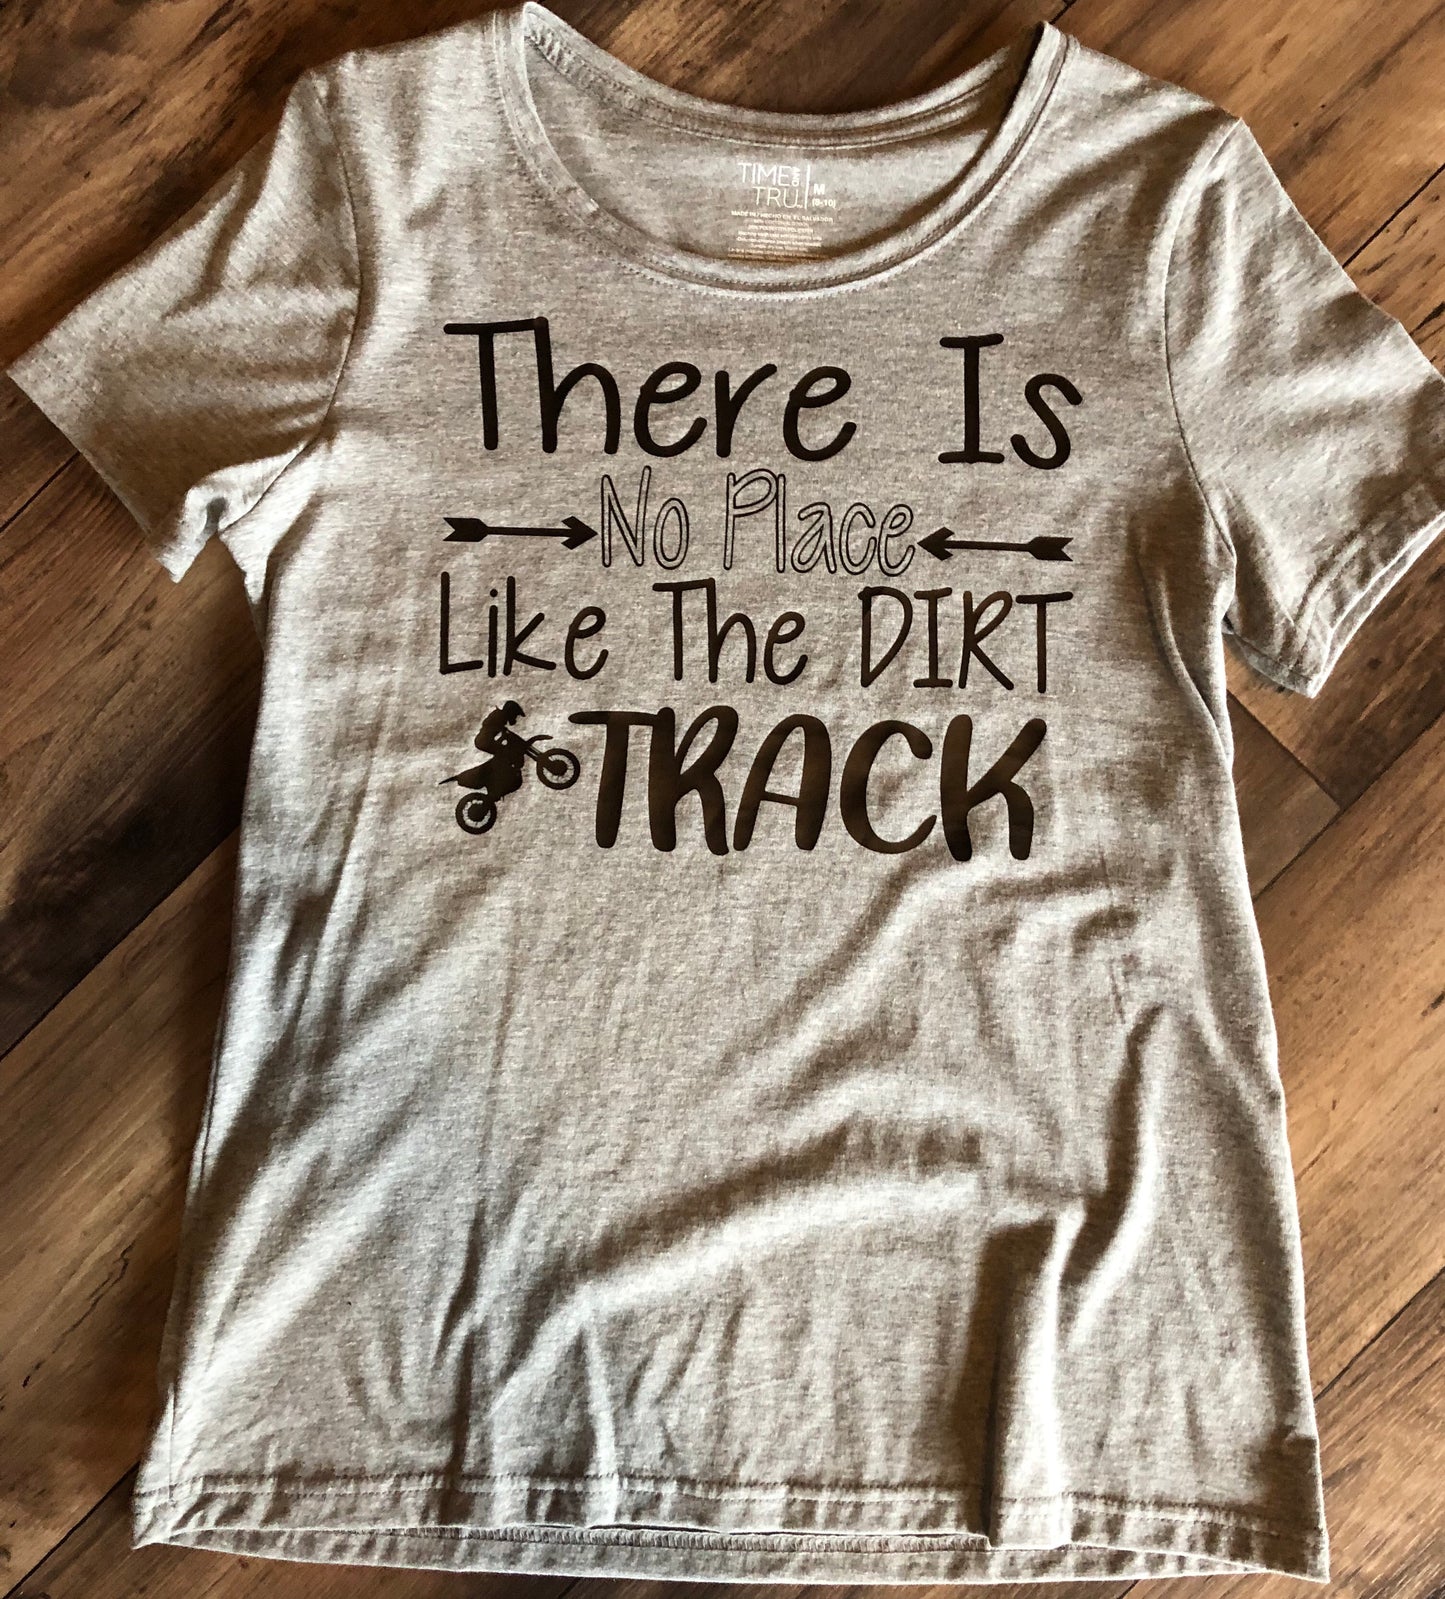 “There Is No Place Like The Dirt Track” Gray T-Shirt Size M